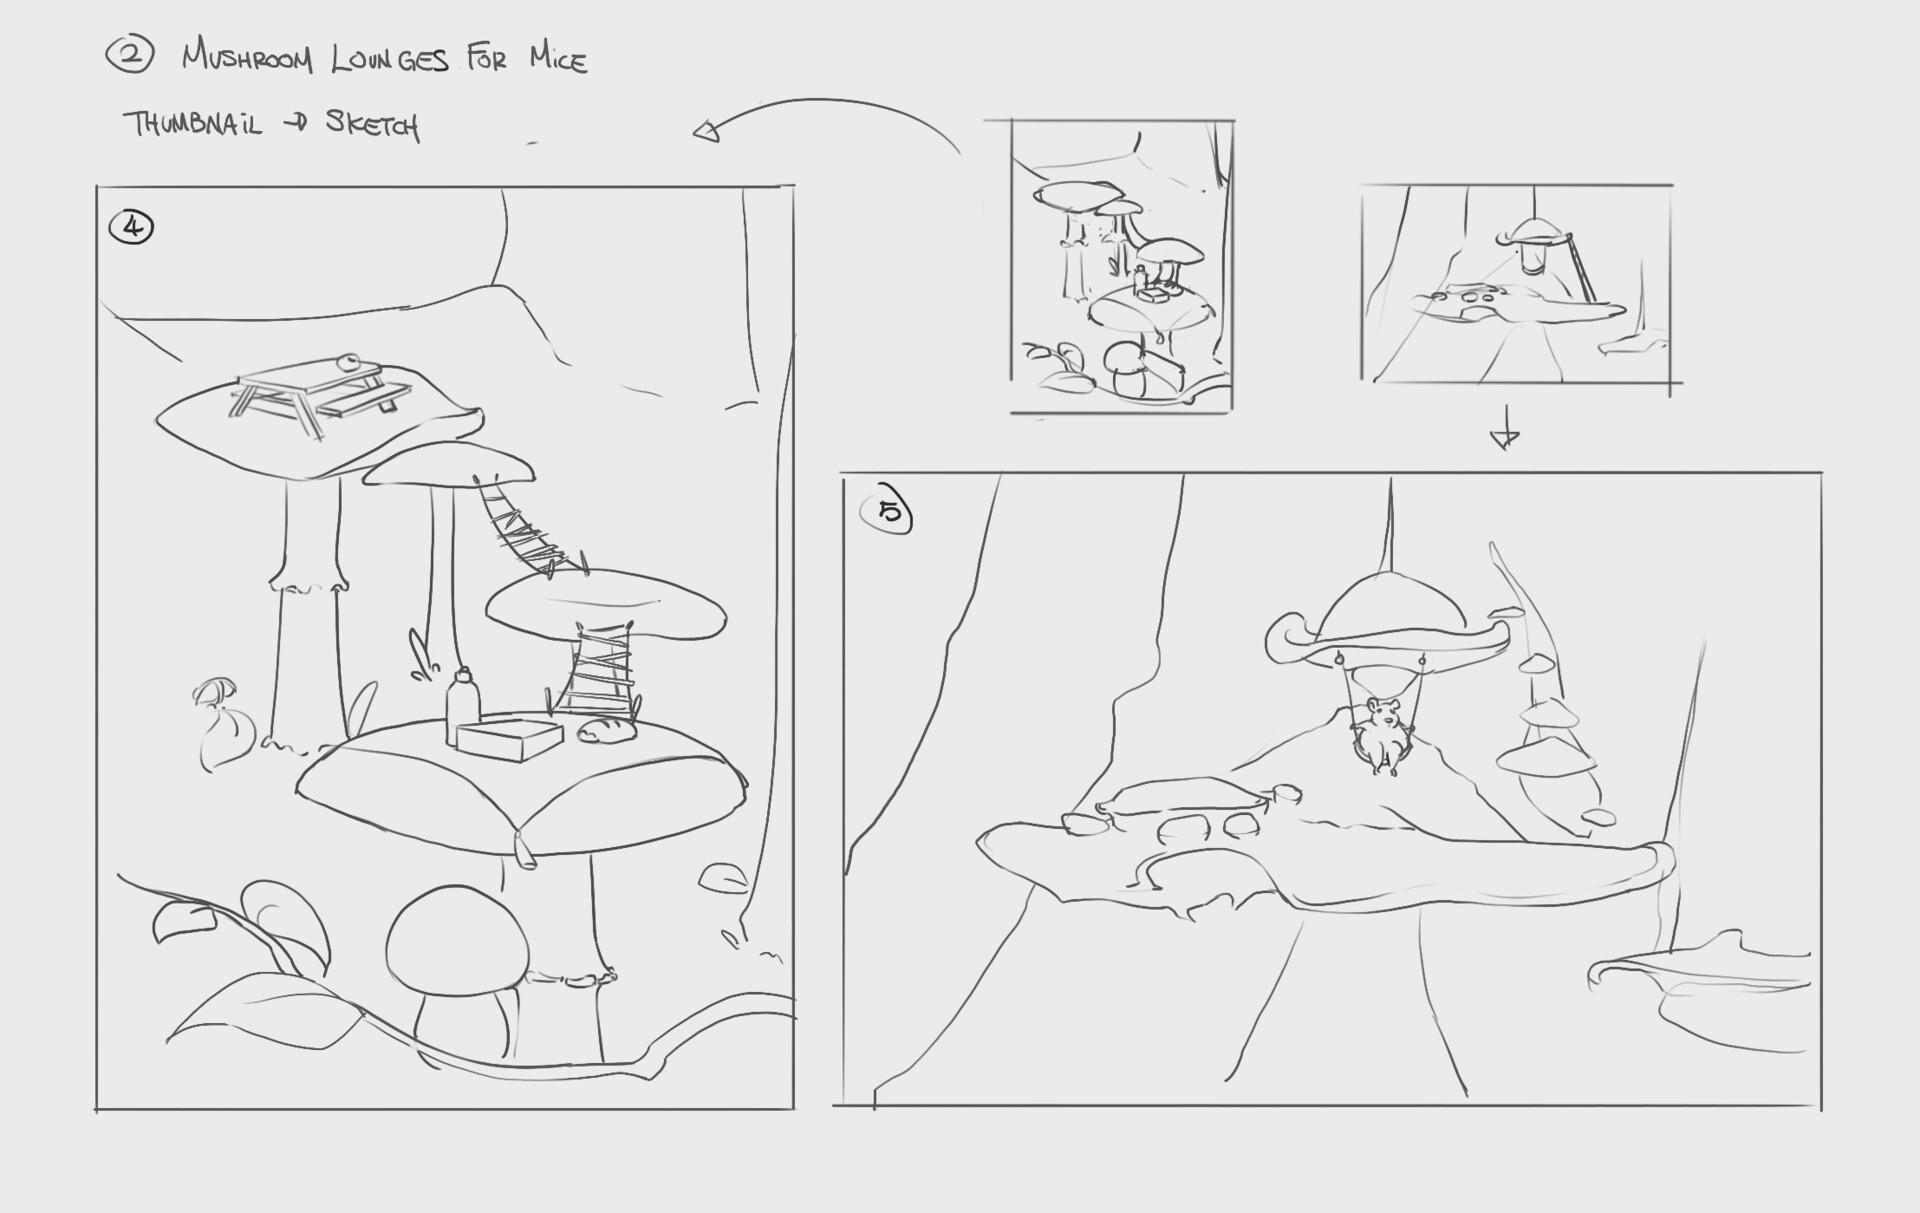 Sketch iterations of the mushroom lounge 2